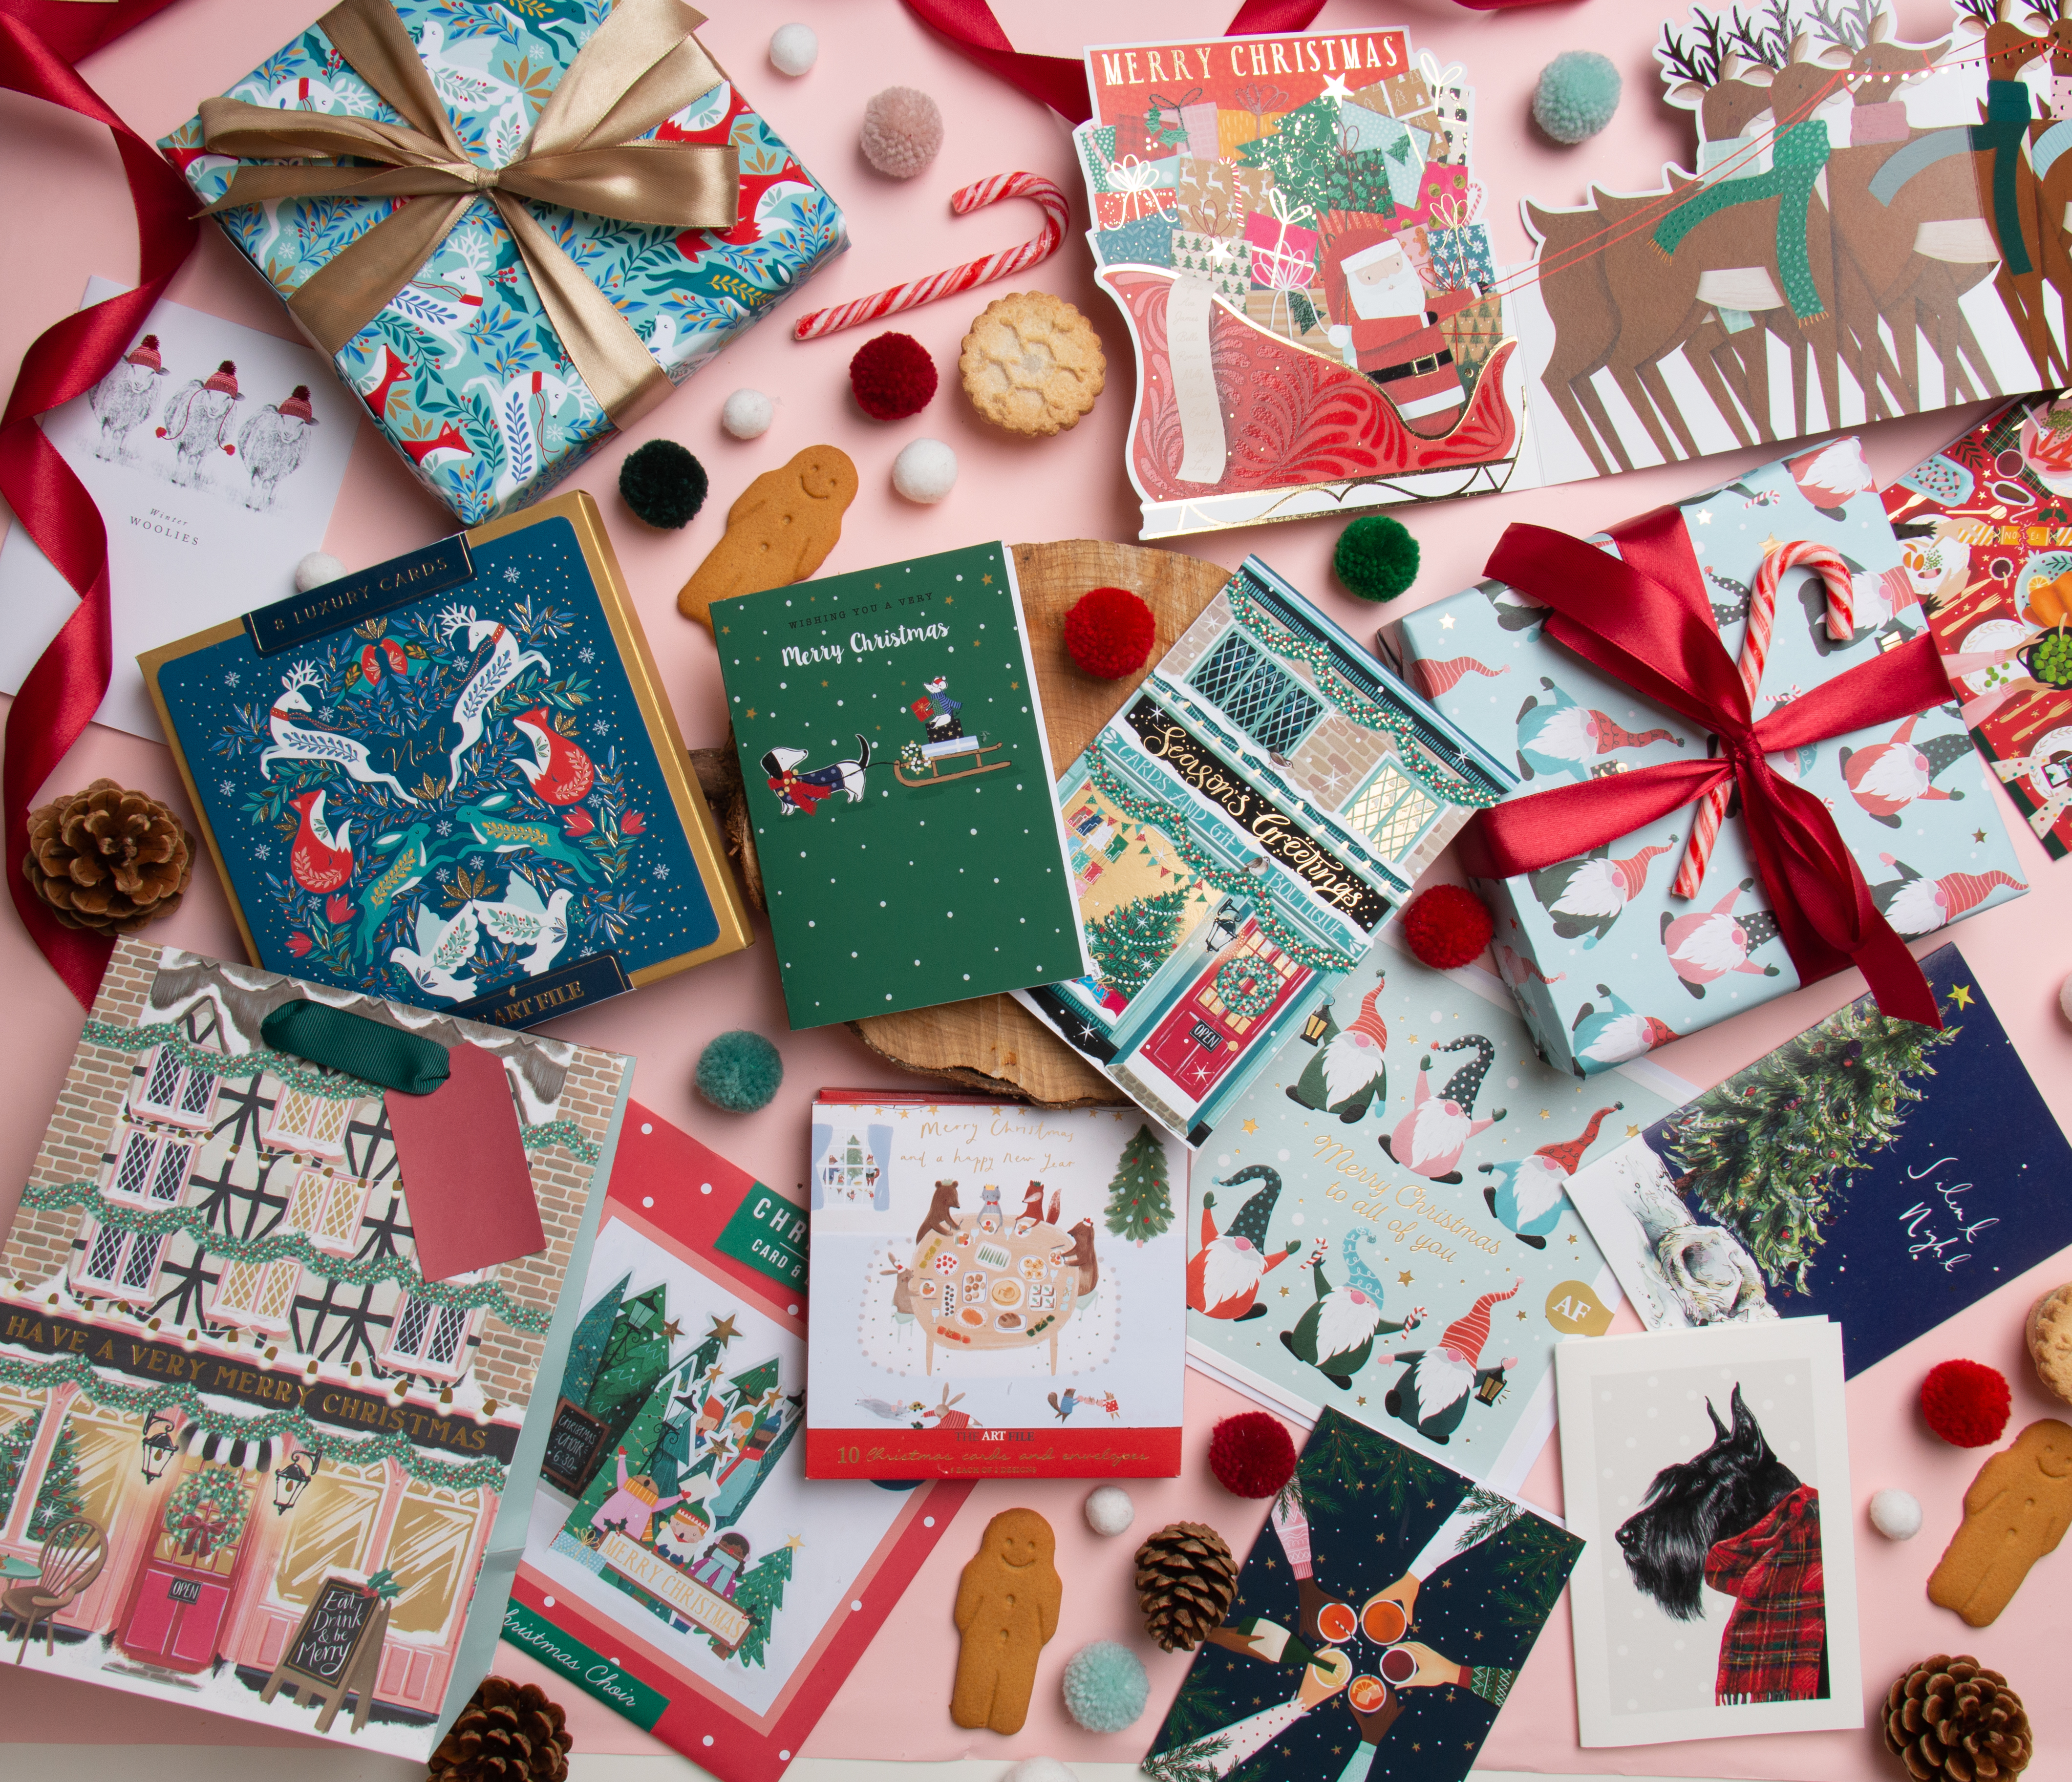 Above: A selection of The Art File Christmas products.